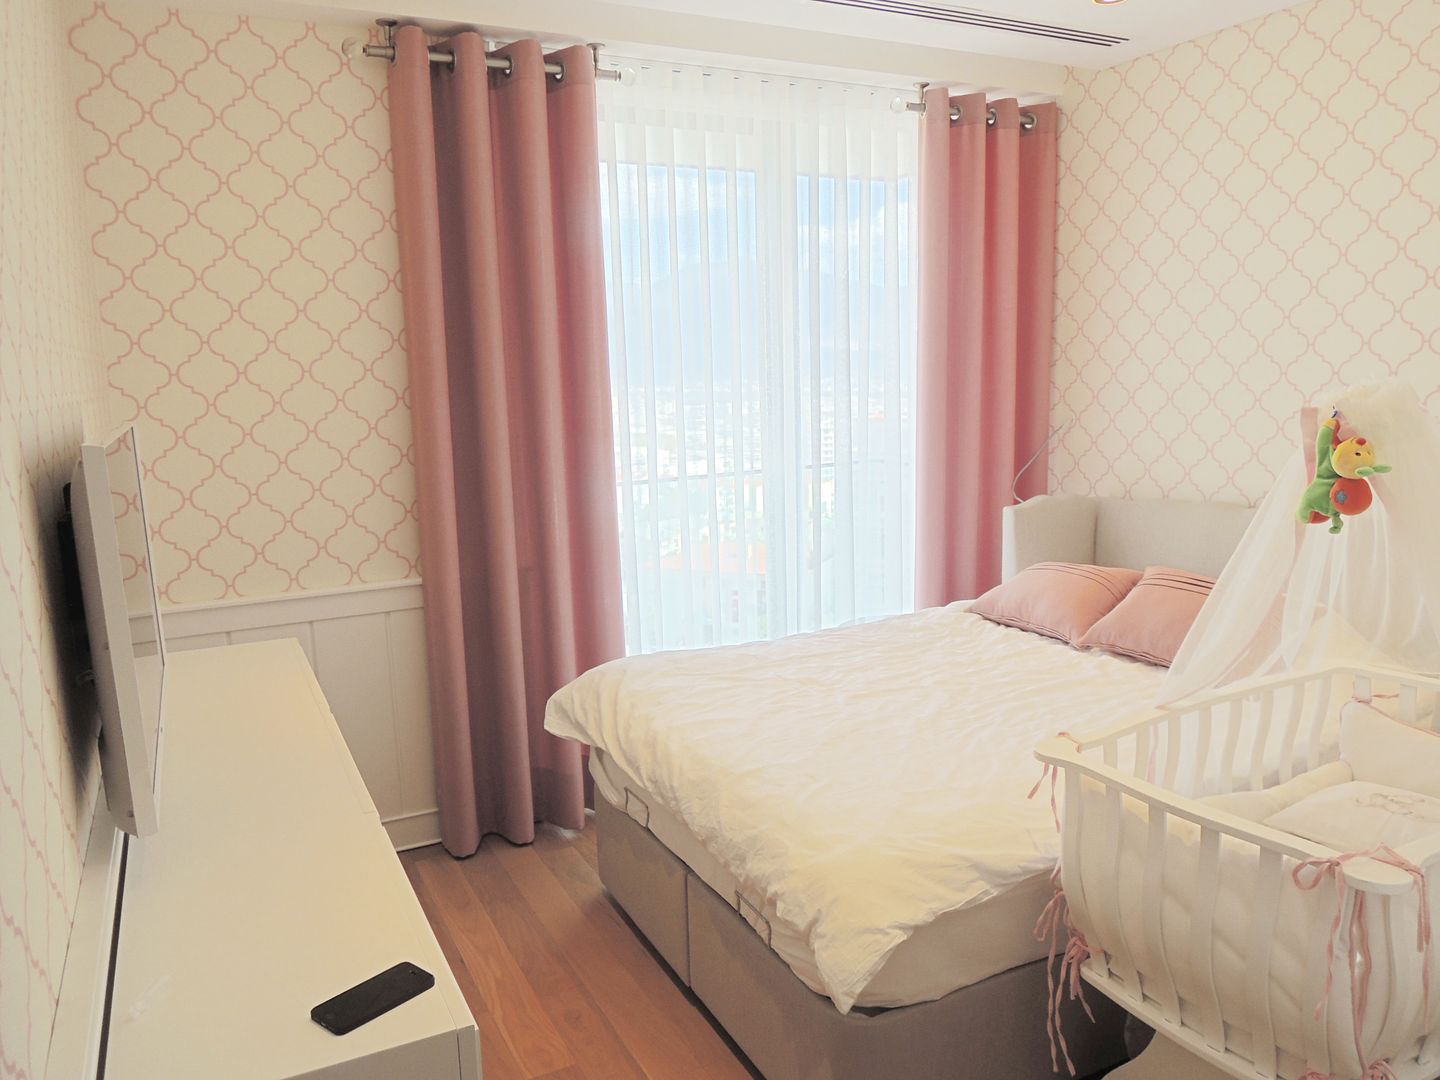 A Project by Visage Home Style , Visage Home Style Visage Home Style Kamar Tidur Modern